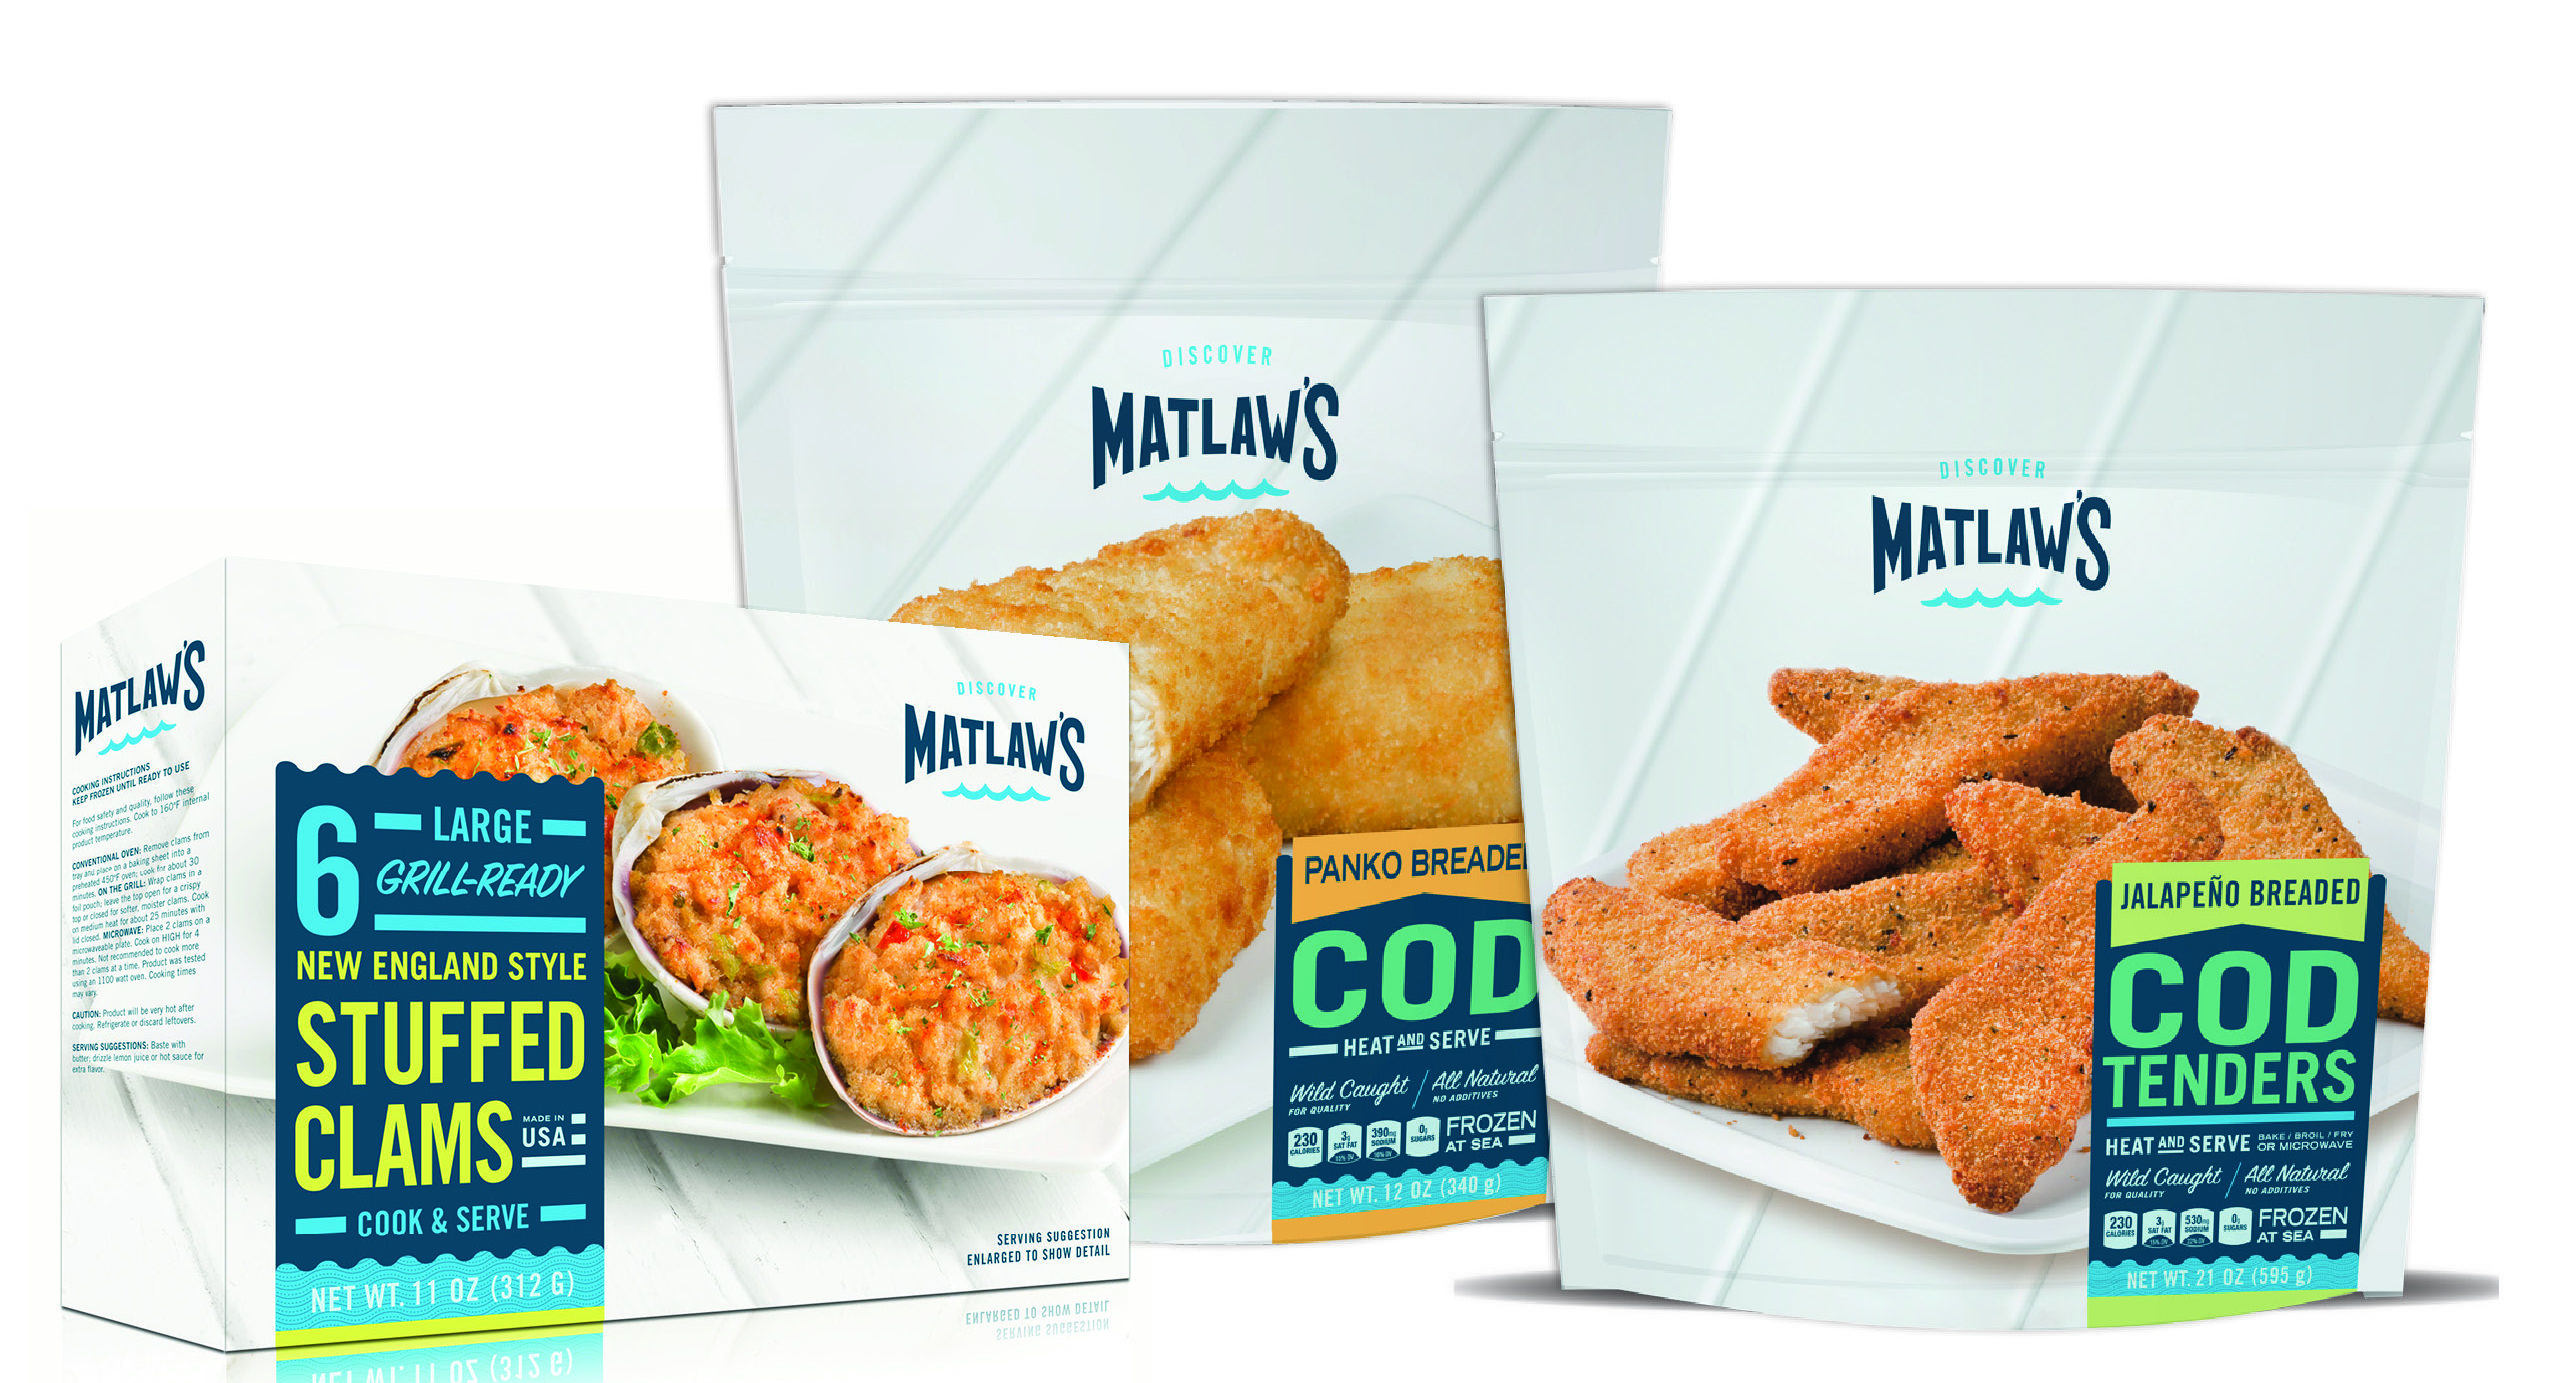  Matlaw's products at Seafood Expo North America 2014